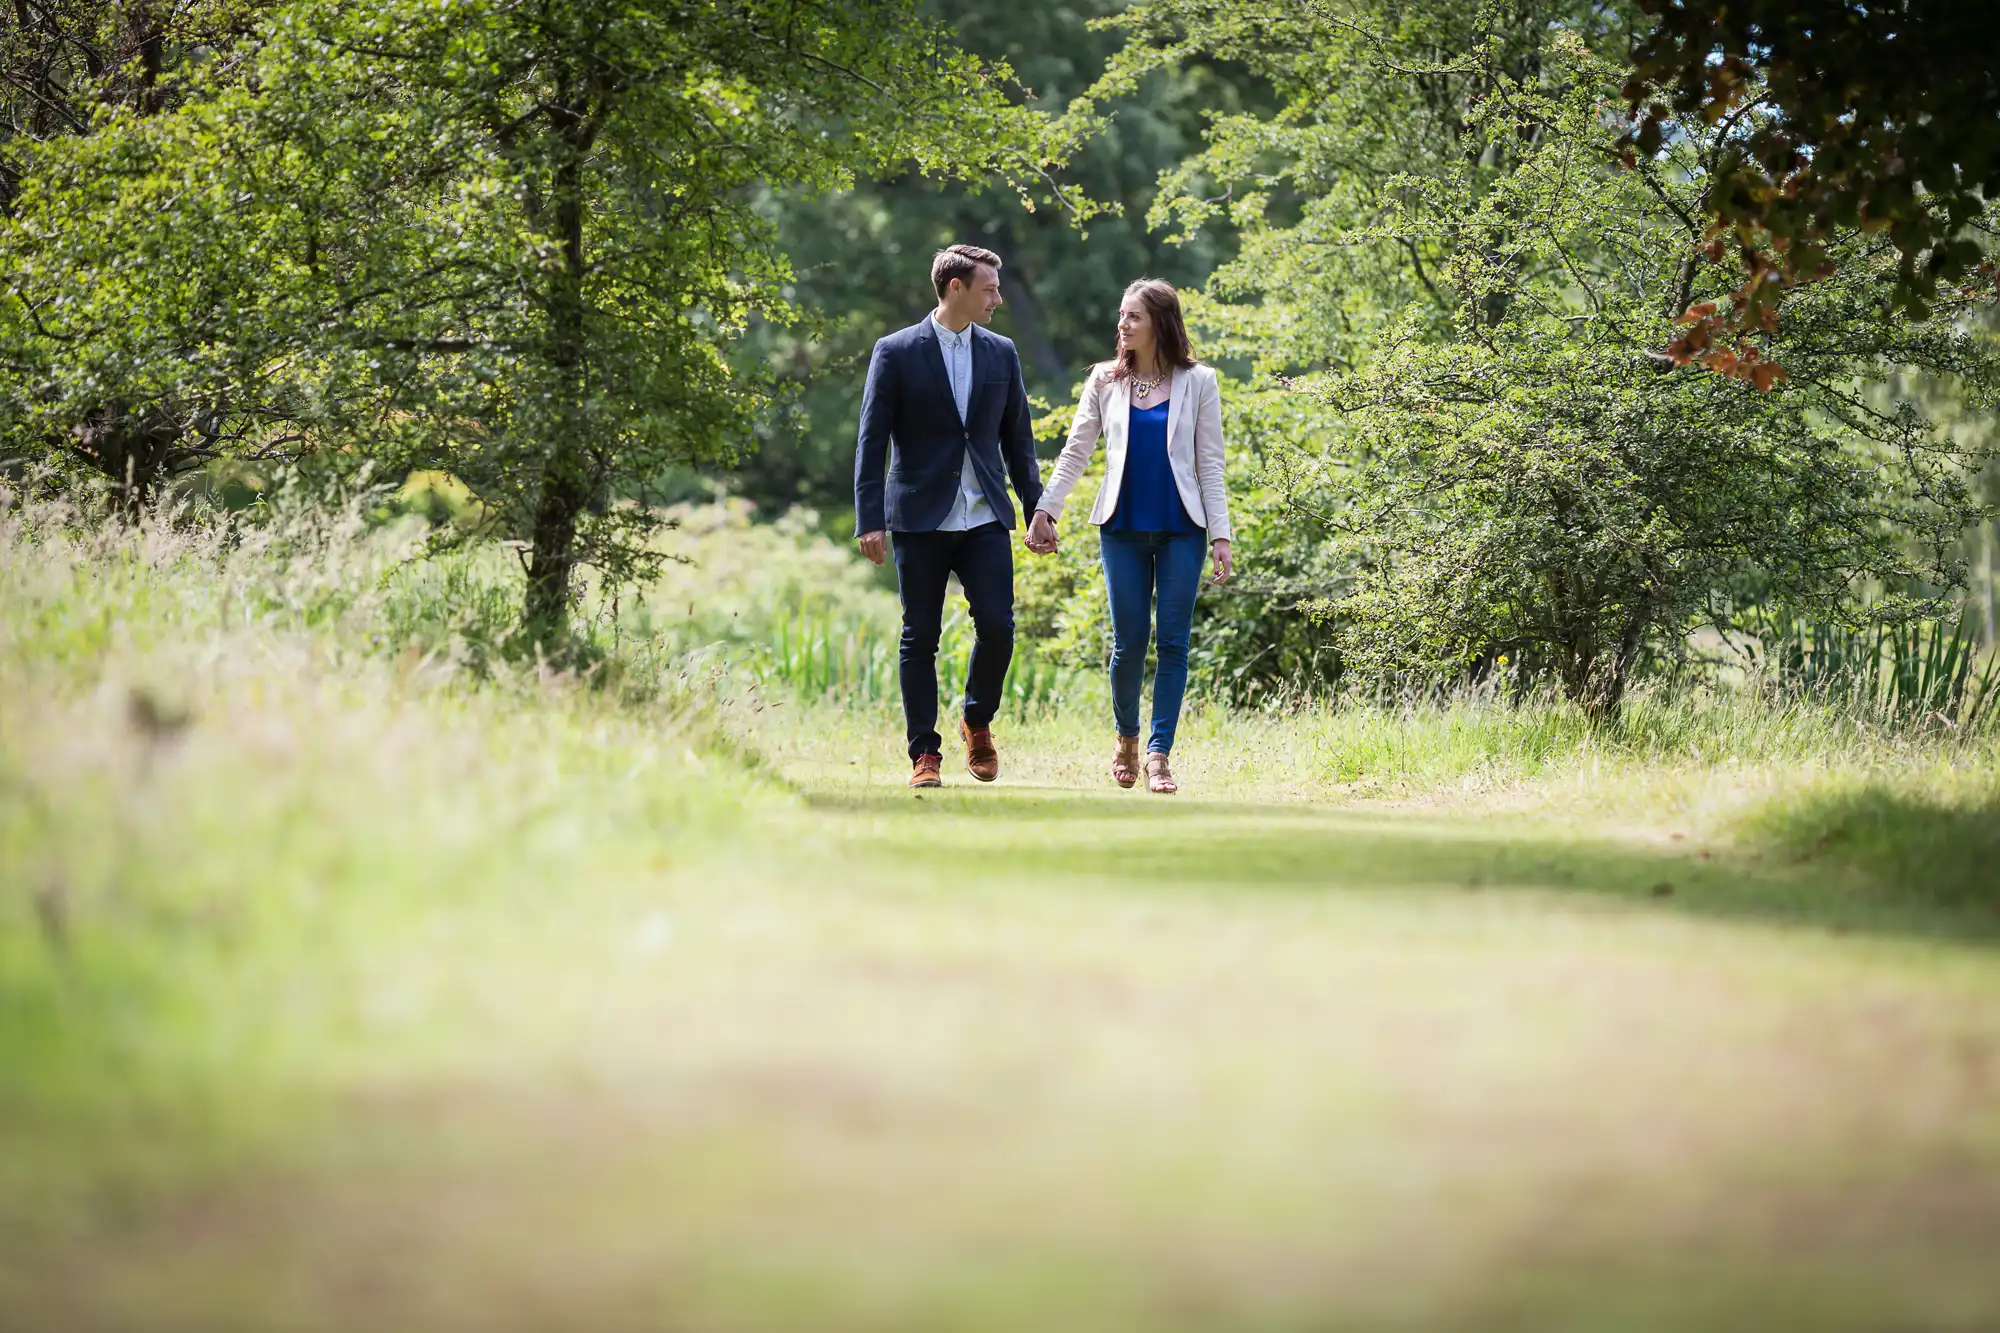 A young couple holding hands while walking on a sunny forest path. both are casually dressed, the man in a blazer and the woman in a blouse.